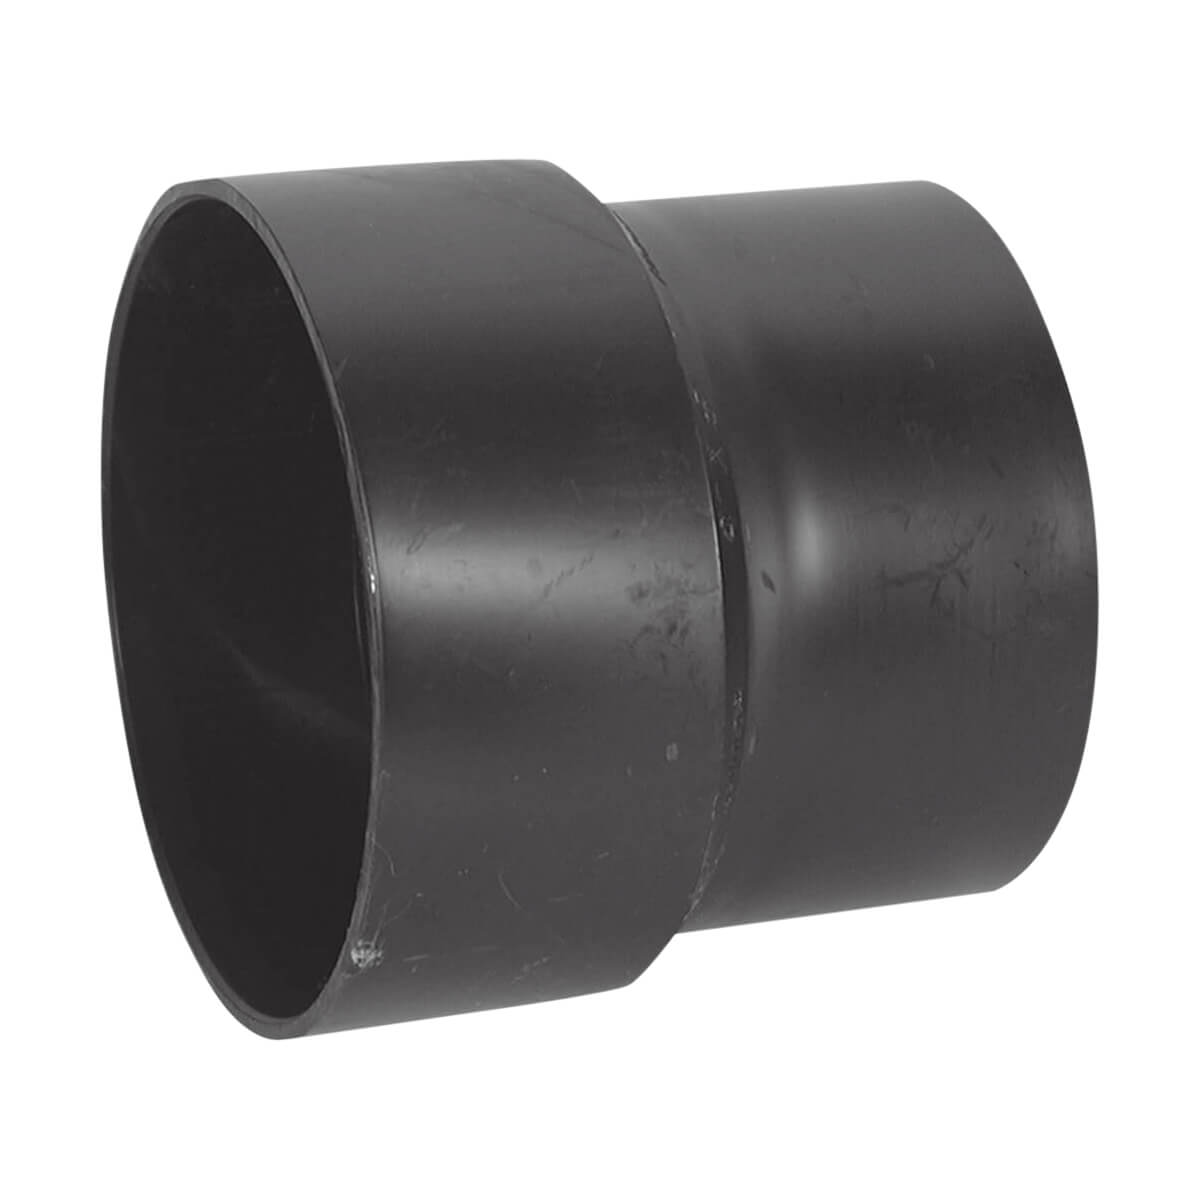 ABS-DWV Hub Adapter - Sewer to DWV - Hub - 4-in x 3-in